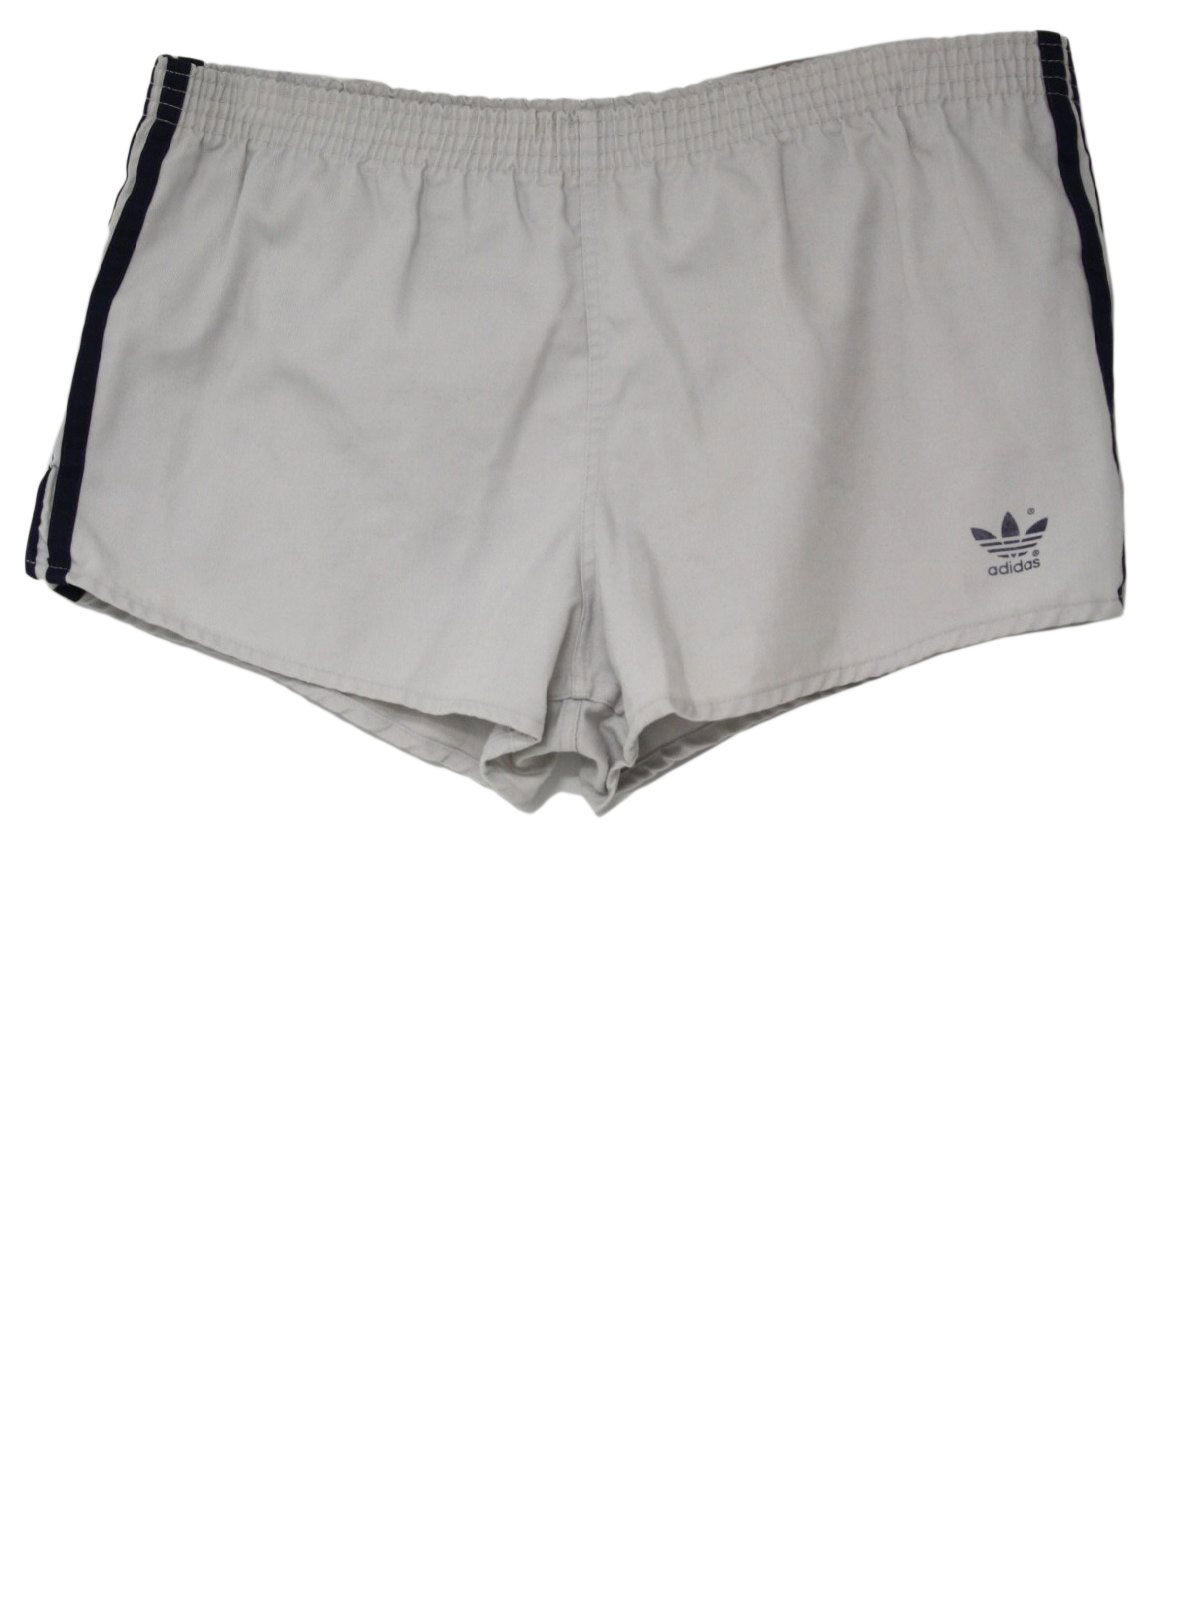 1980's Retro Shorts: 80s -Adidas- Mens grey and blue cotton blend sport ...